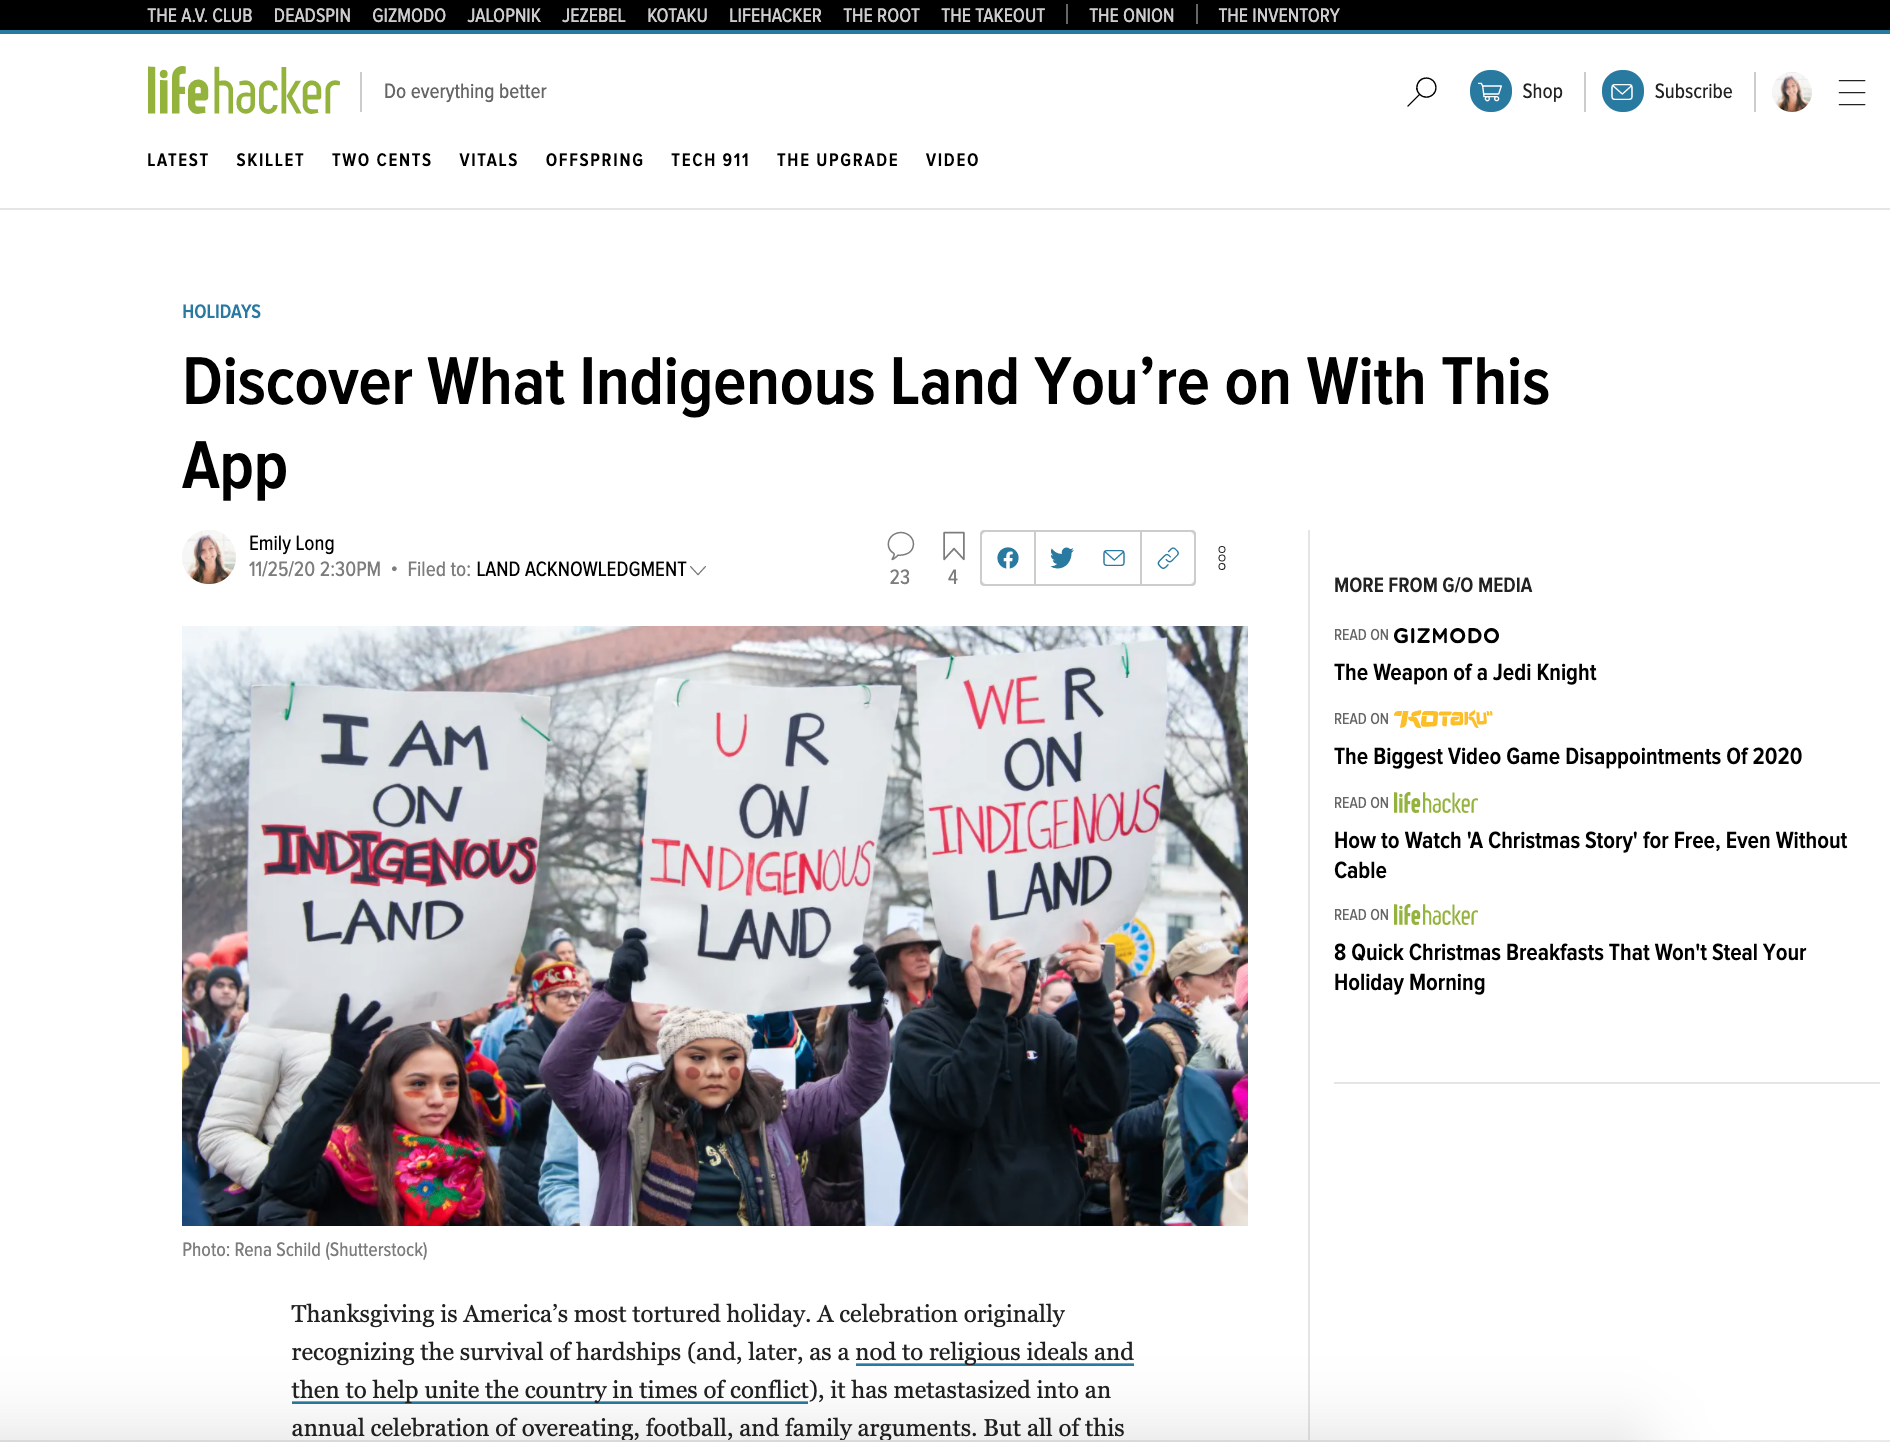 Lifehacker: Discover What Indigenous Land You’re on With This App